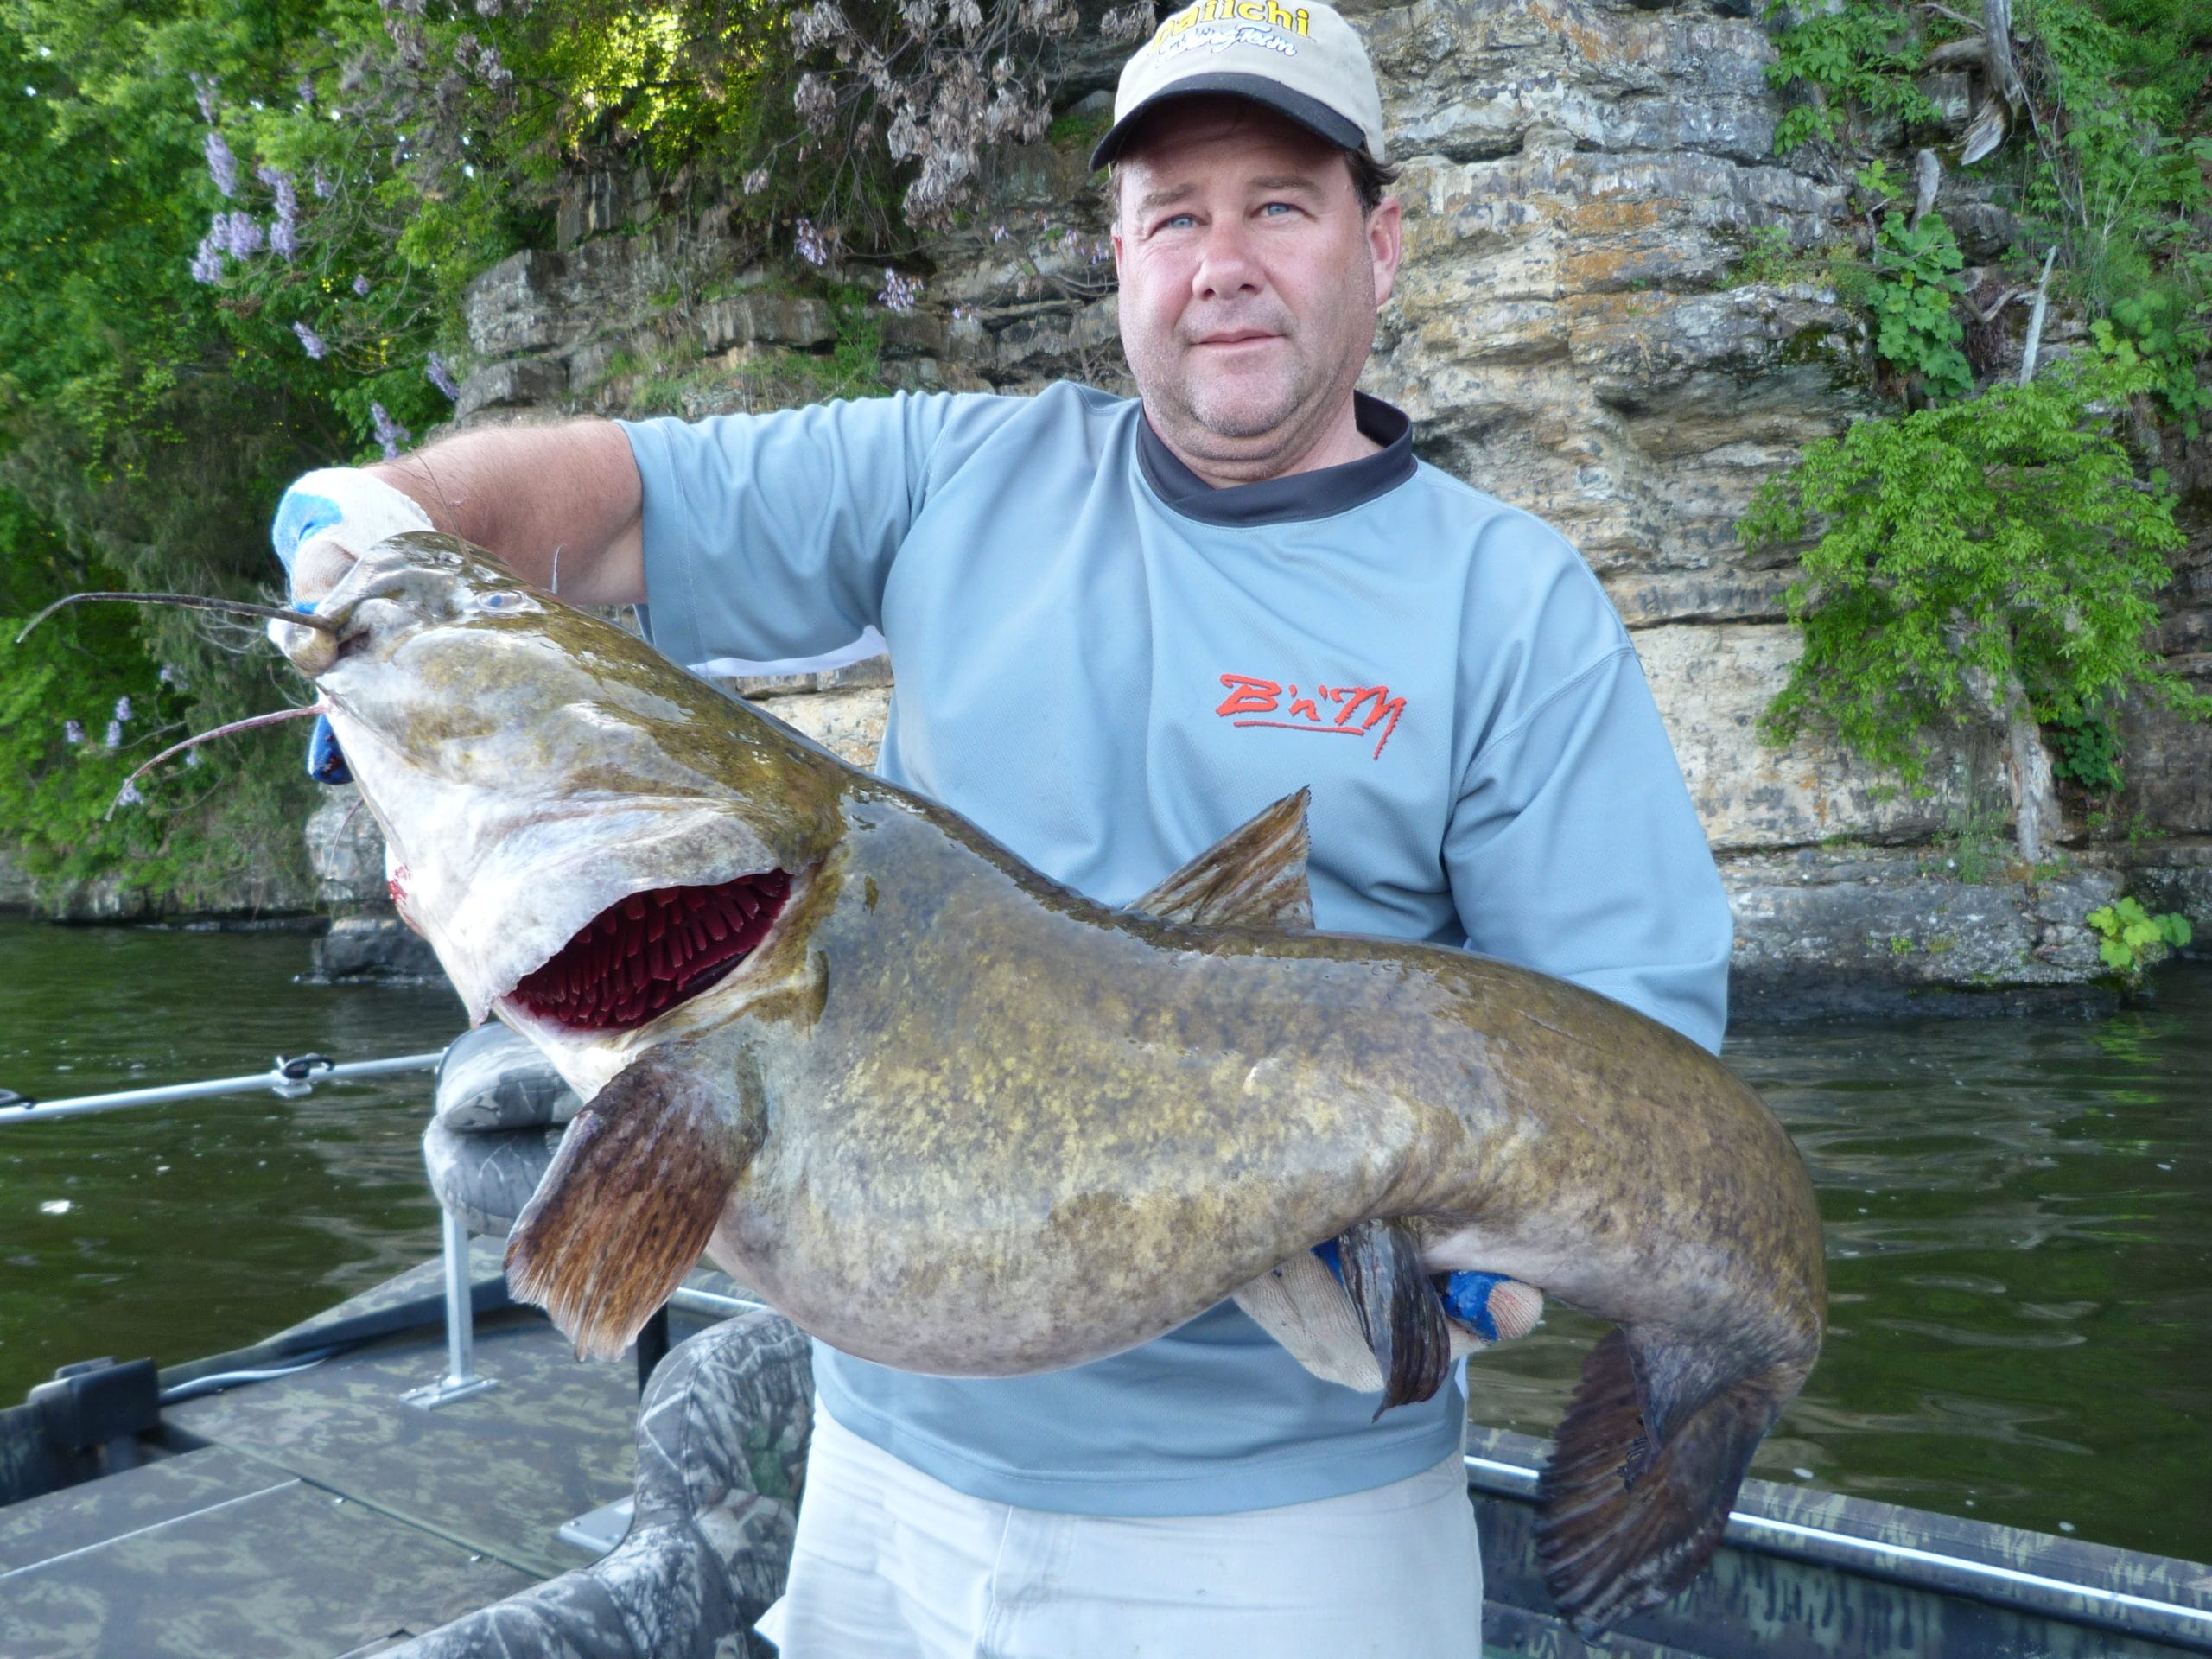 Catfish get very big! Here's guide Brian Barton with a monster catfish from the Tennessee River in Alabama. 